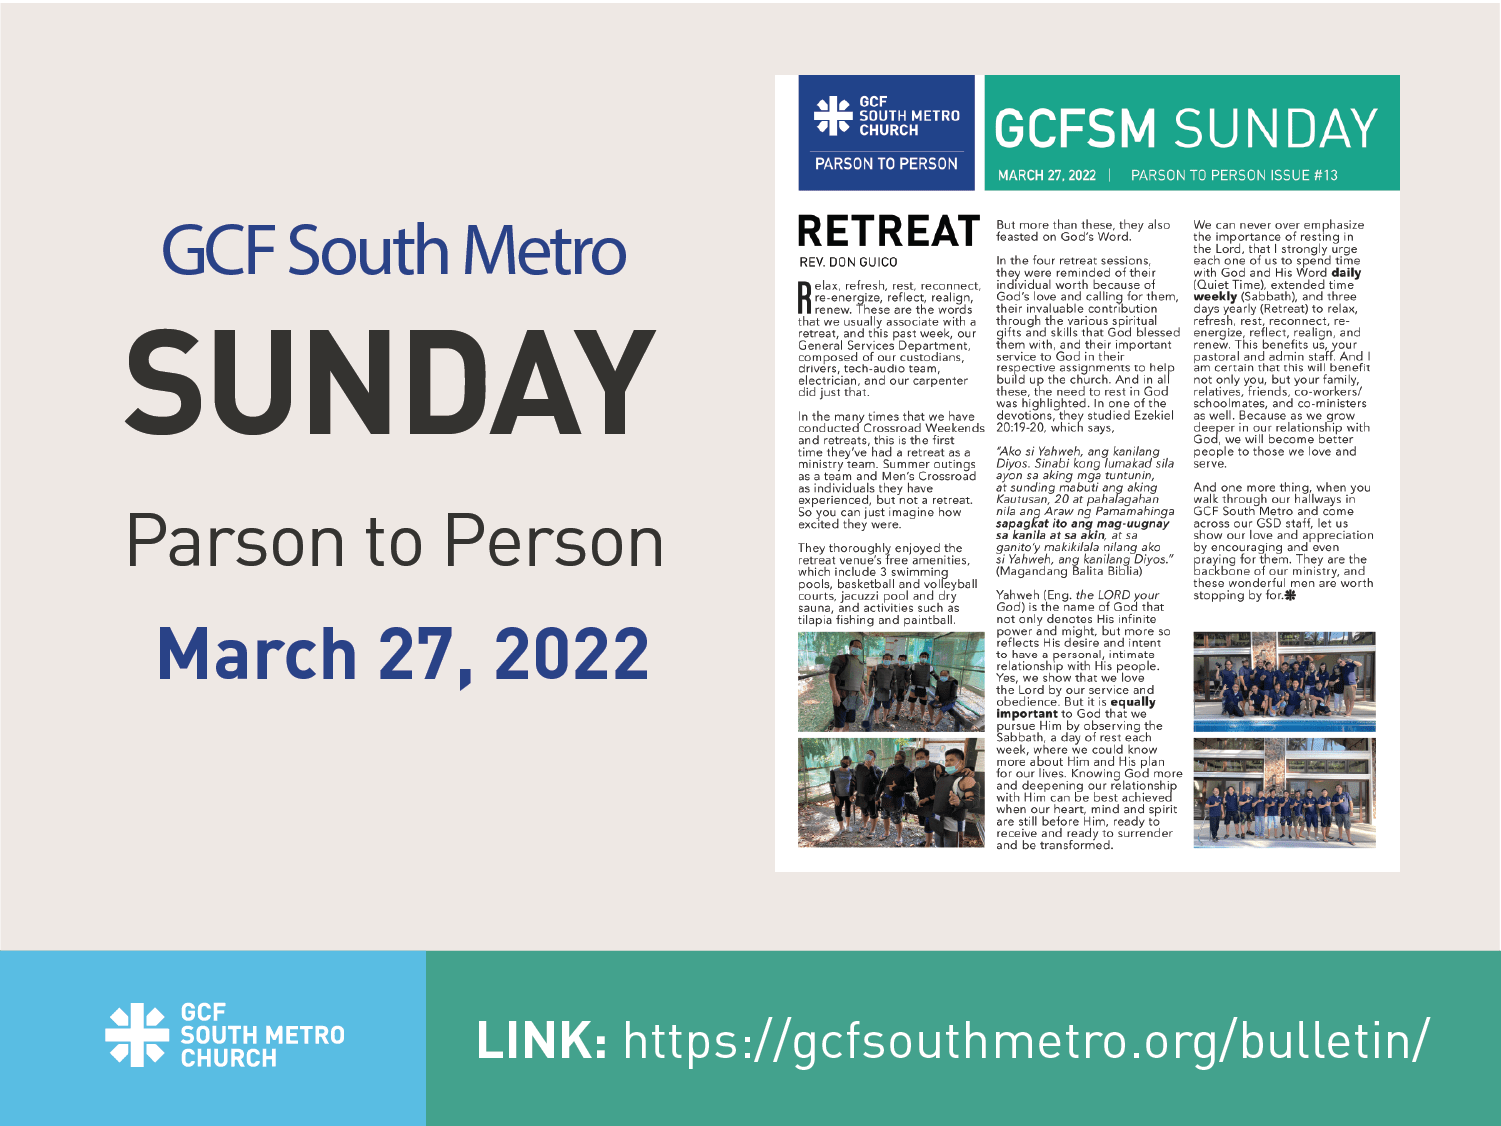 Sunday Bulletin – Parson to Person, March 27, 2022